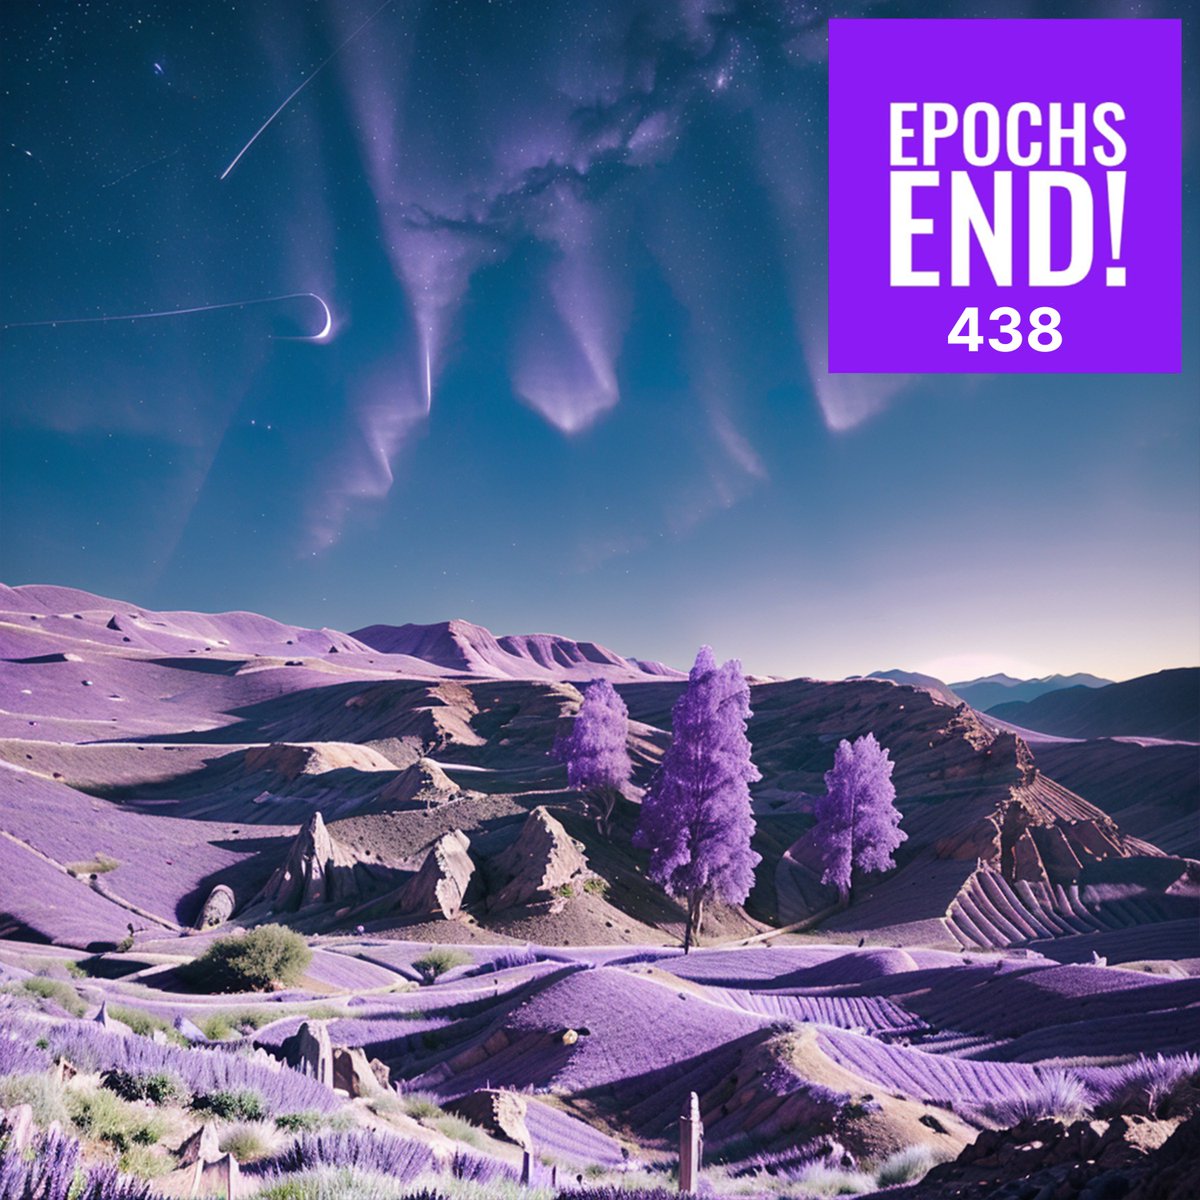 HAPPY EPOCHS END! 4⃣3⃣8⃣ was WILD - the one where we all wondered if this was the end, or just a new beginning 

for fair trading, for certain tokens, for Web3 personalities, for decentralized funding, and for each other.

#CHEAPERthanTherapy every five days. 🟣🎙️